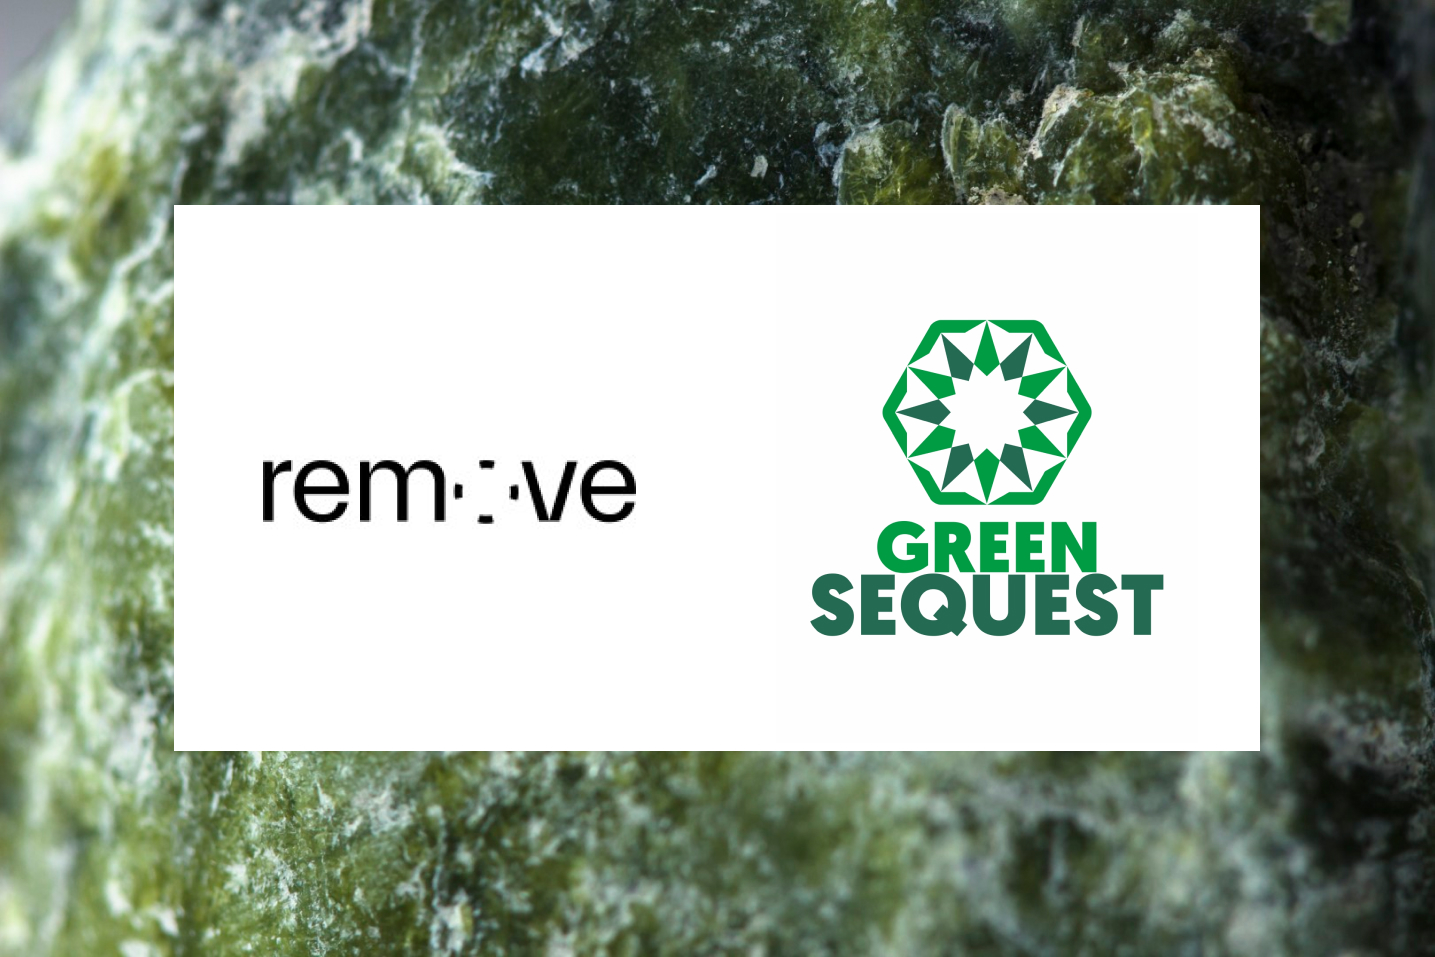 Green Sequest completed remove, first European accelerator program focused solely on CDR